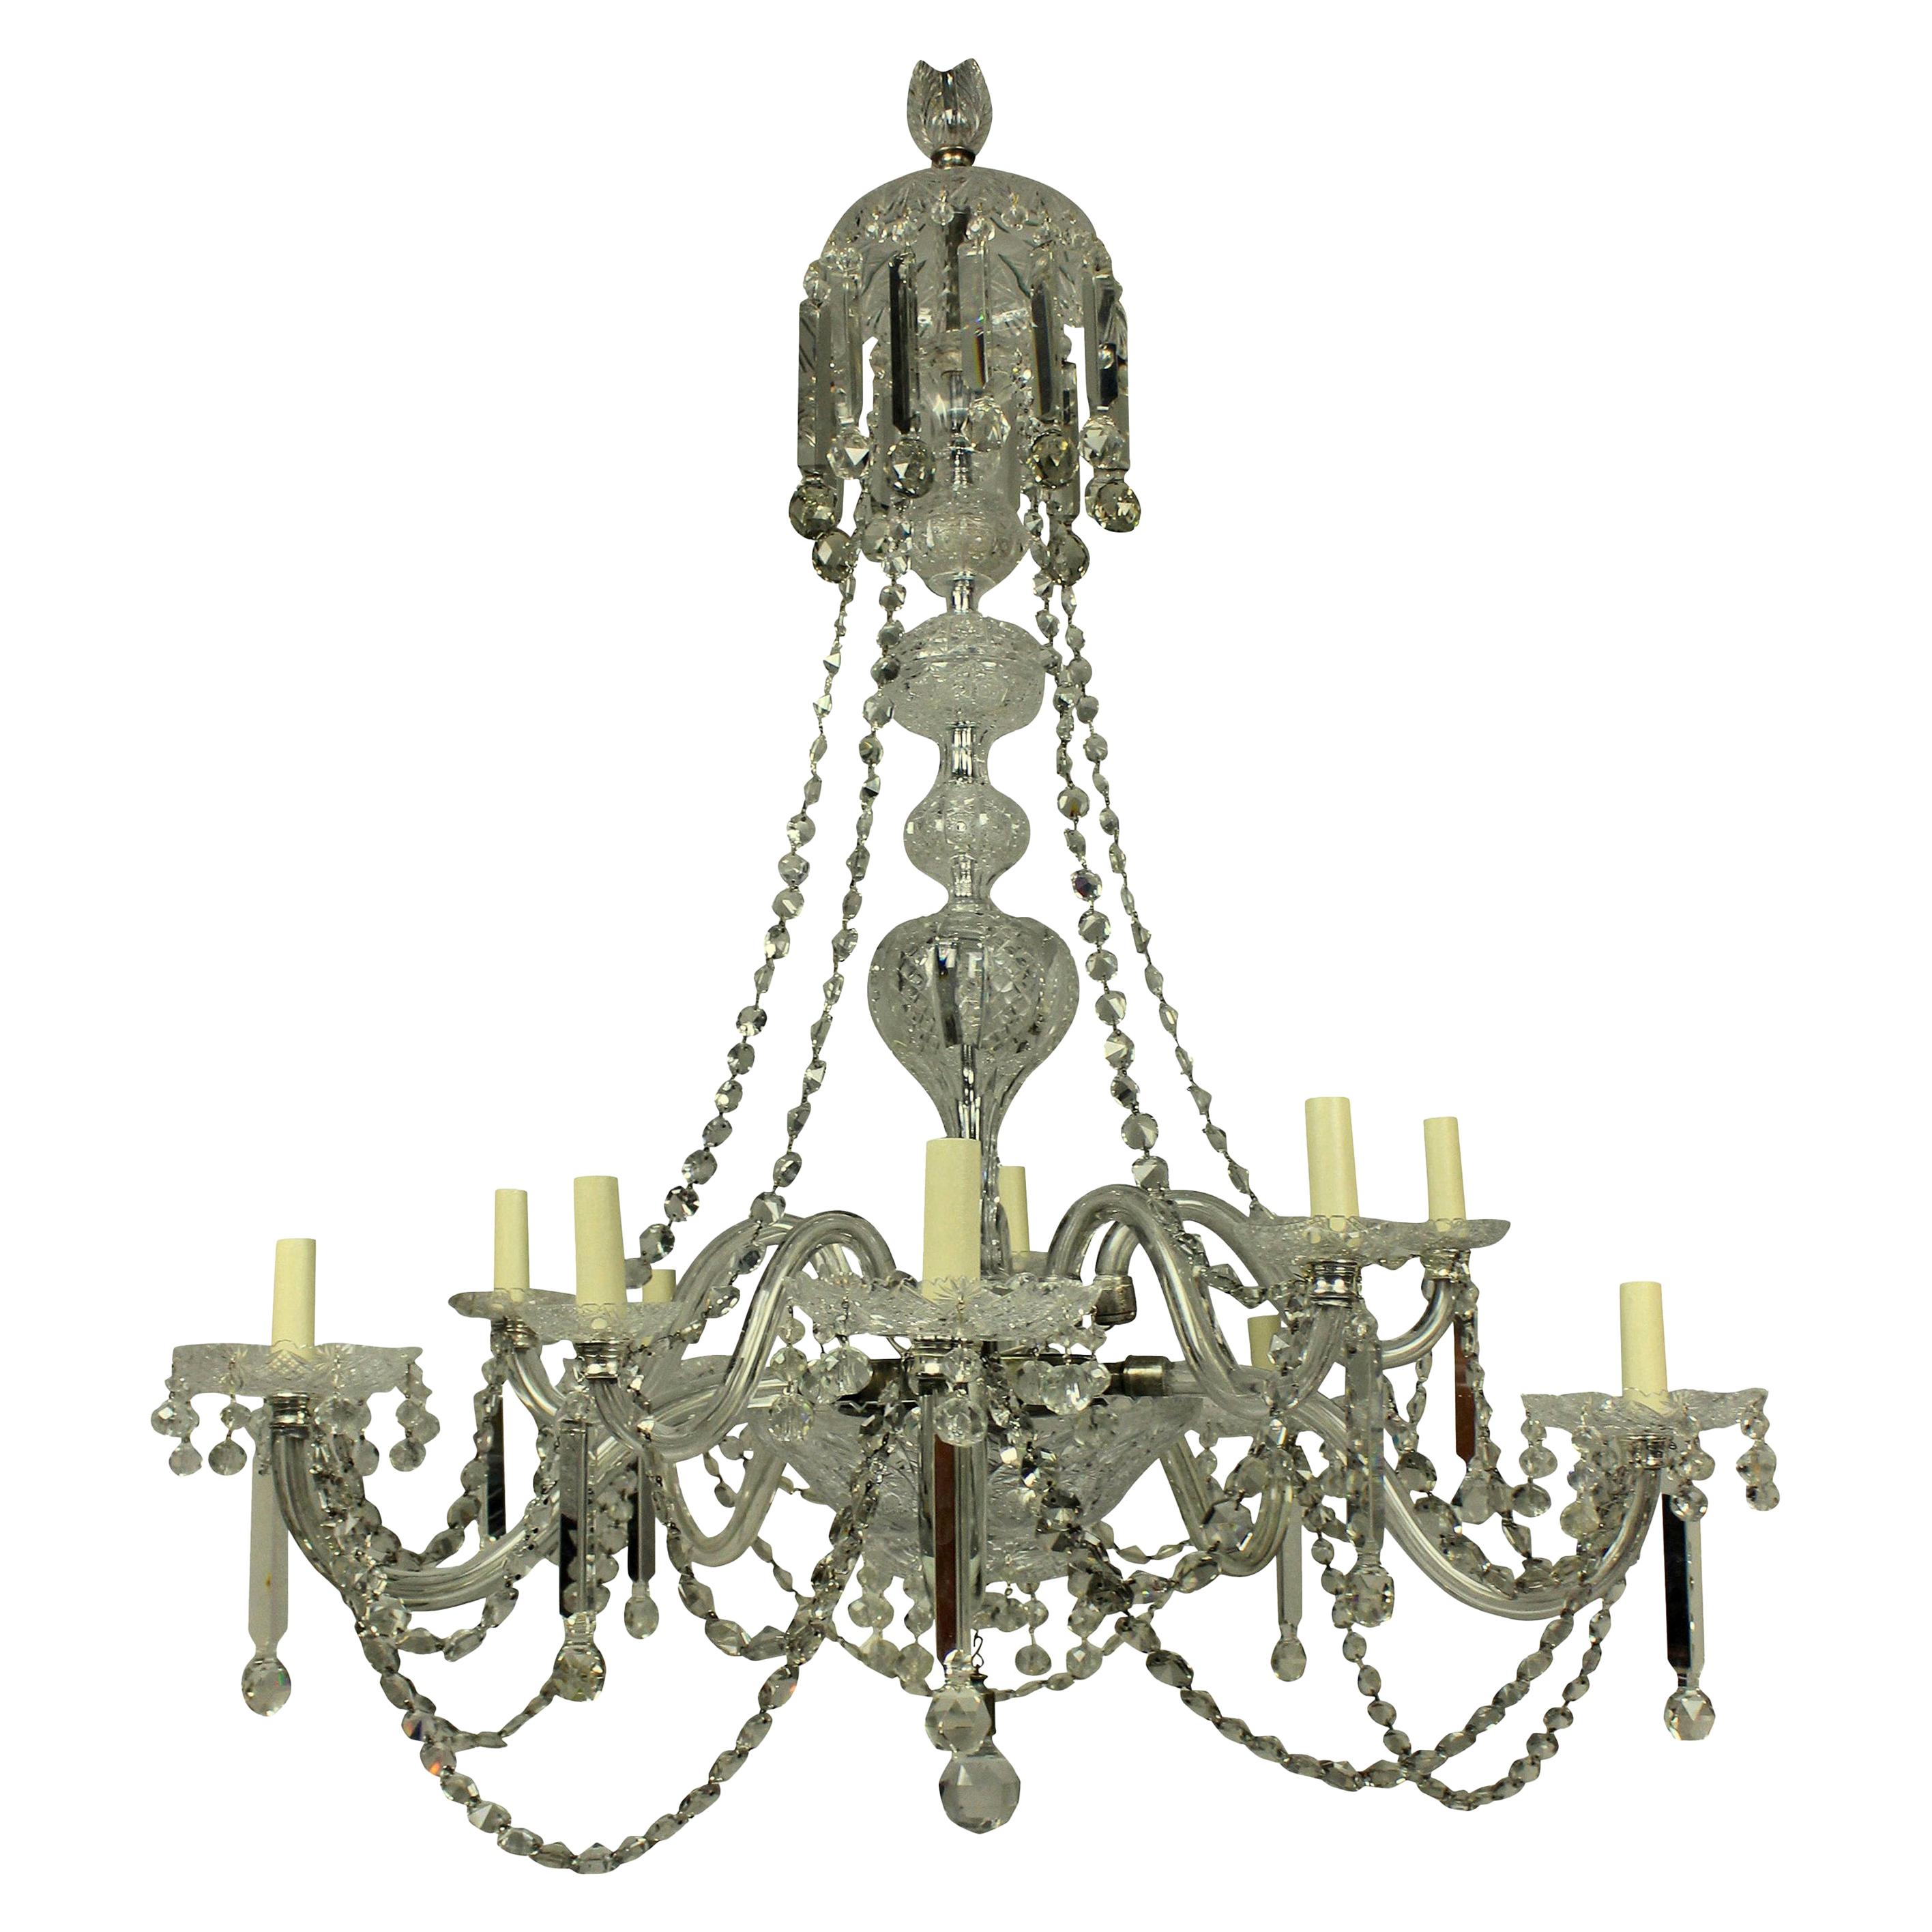 Large 19th Century English Cut-Glass Chandelier of Good Quality